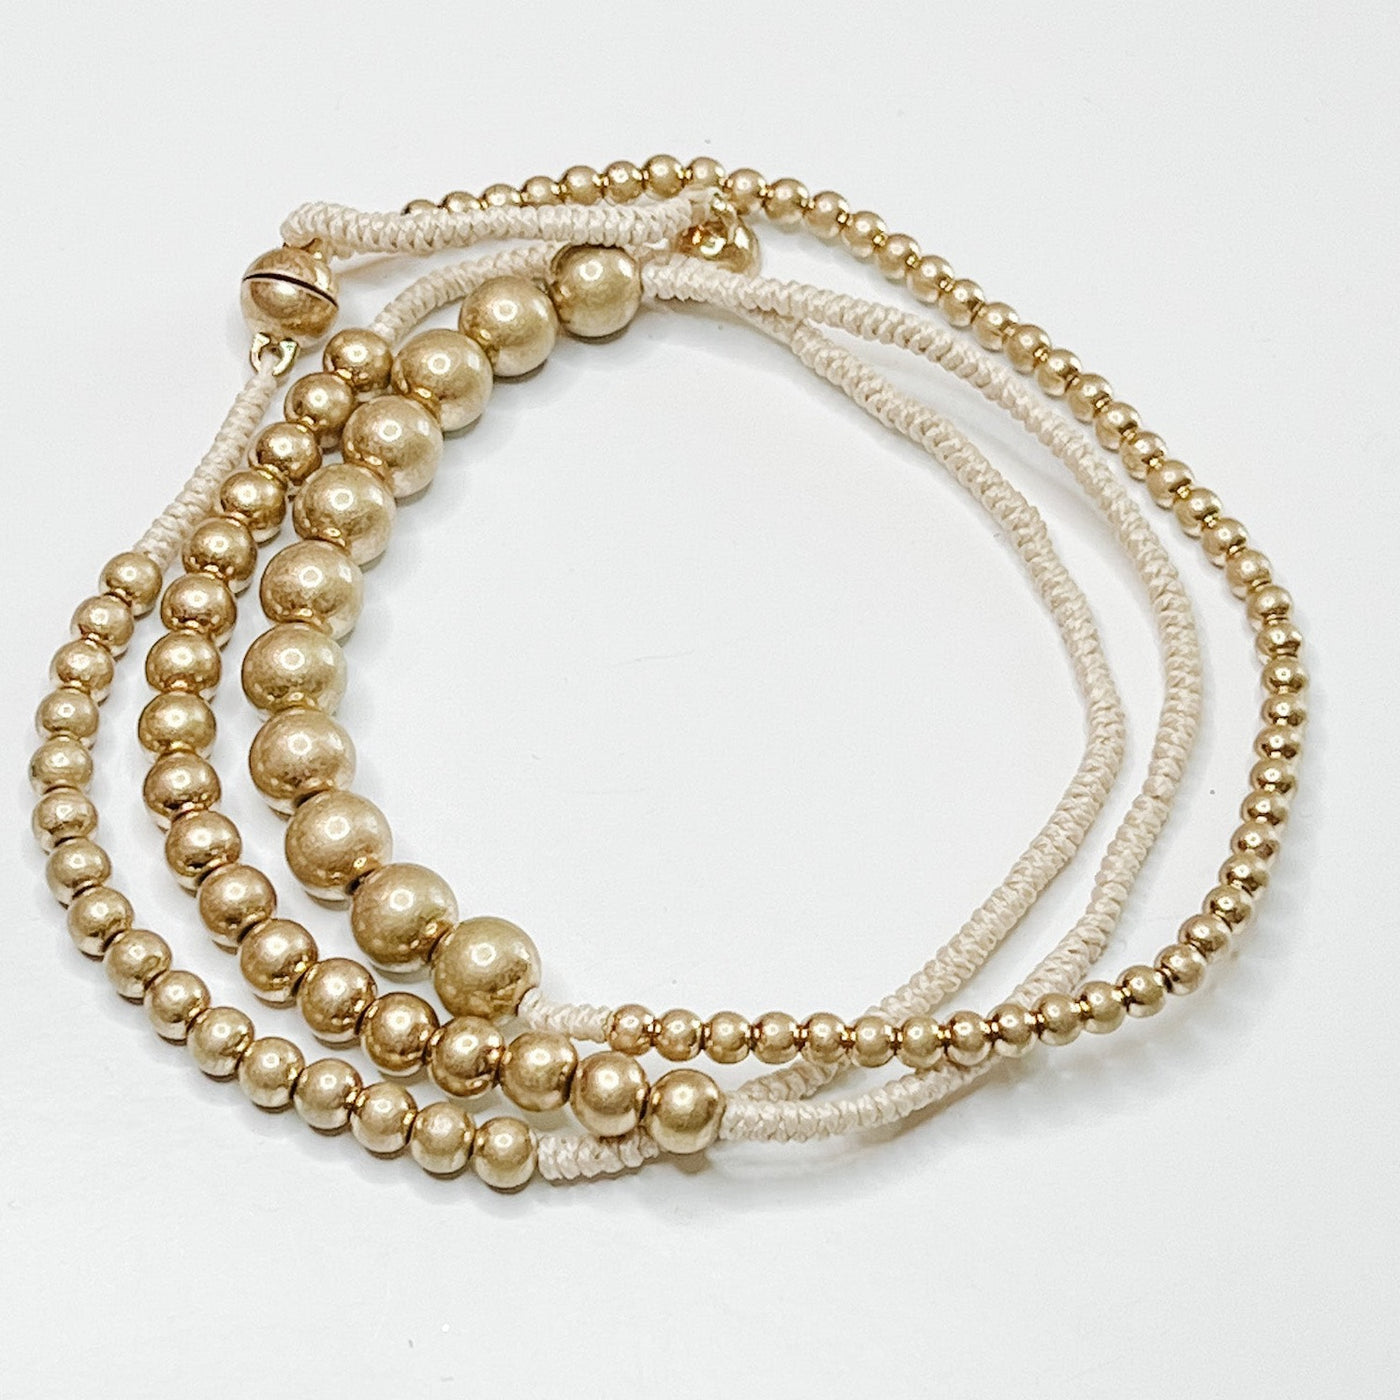 neutral rope and gold ball strand bracelet. Magnetic clasp